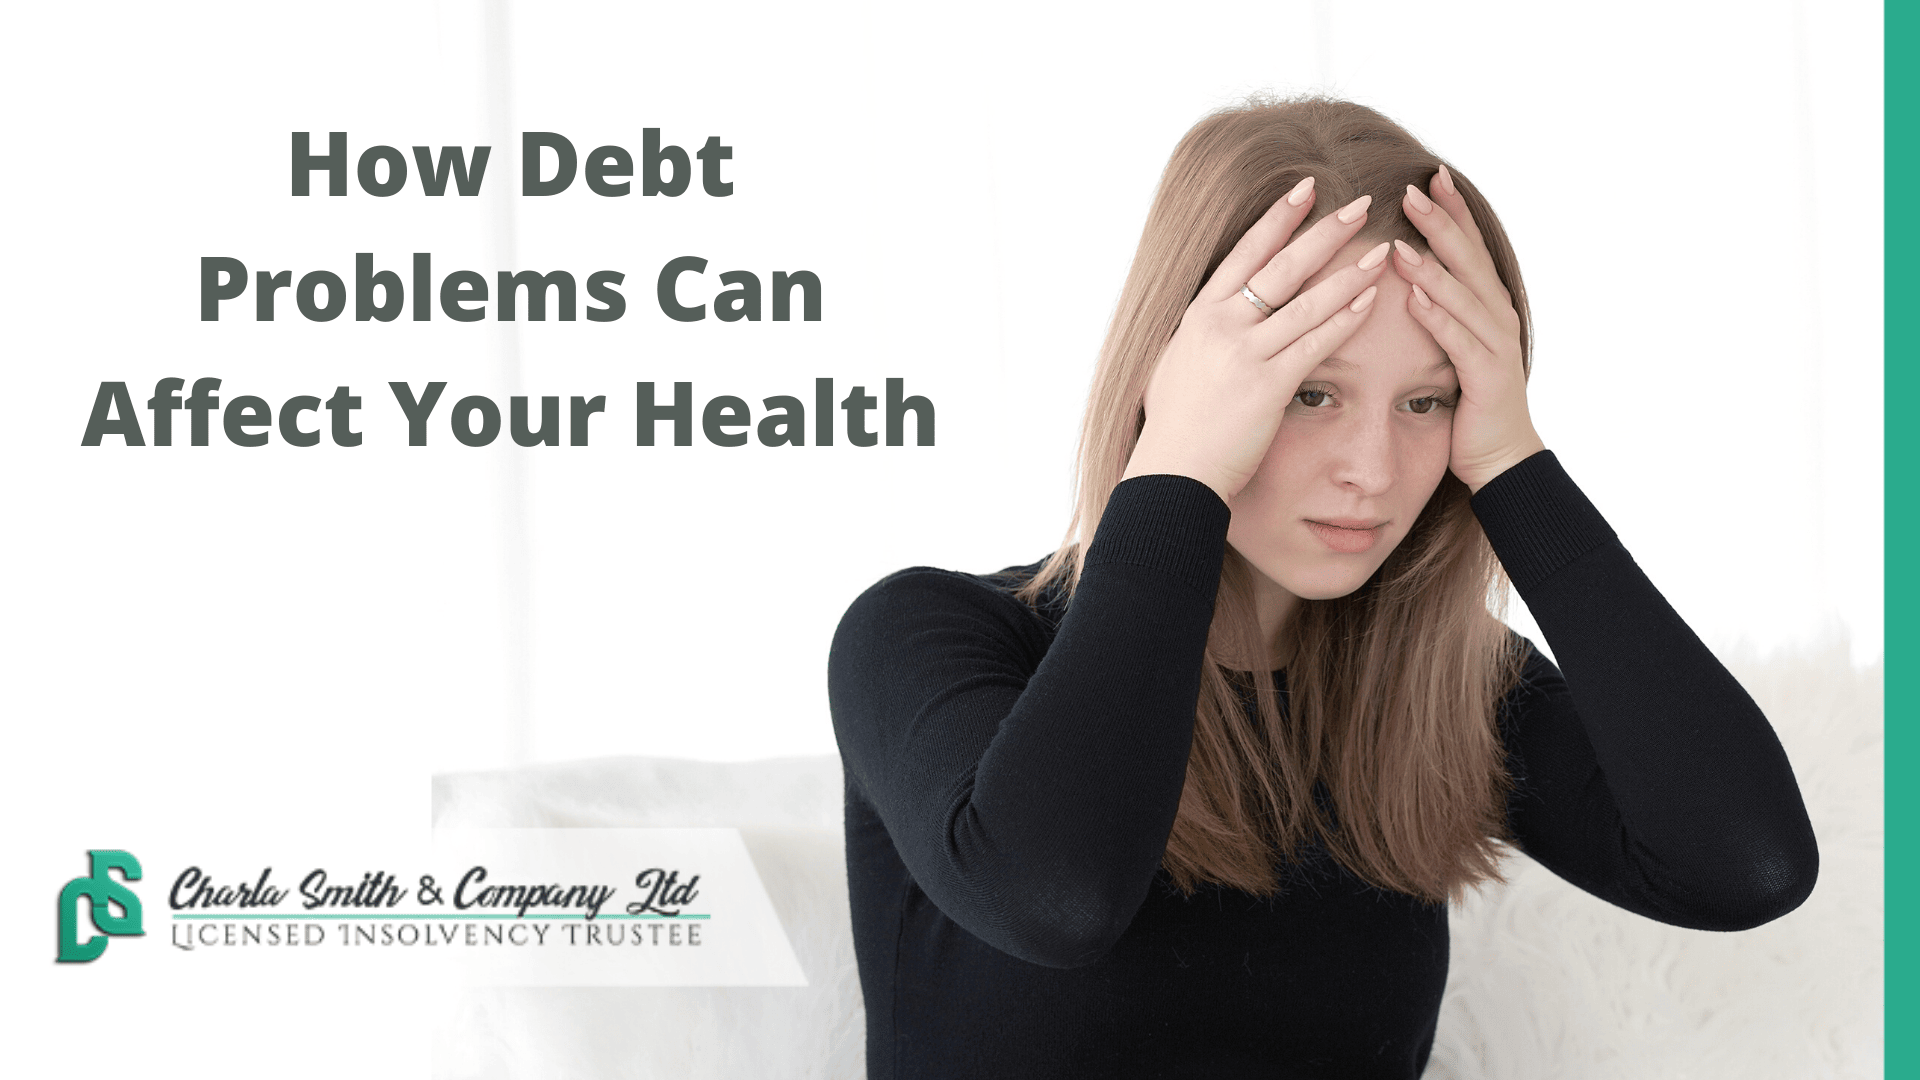 How Debt Problems Can Affect Your Health